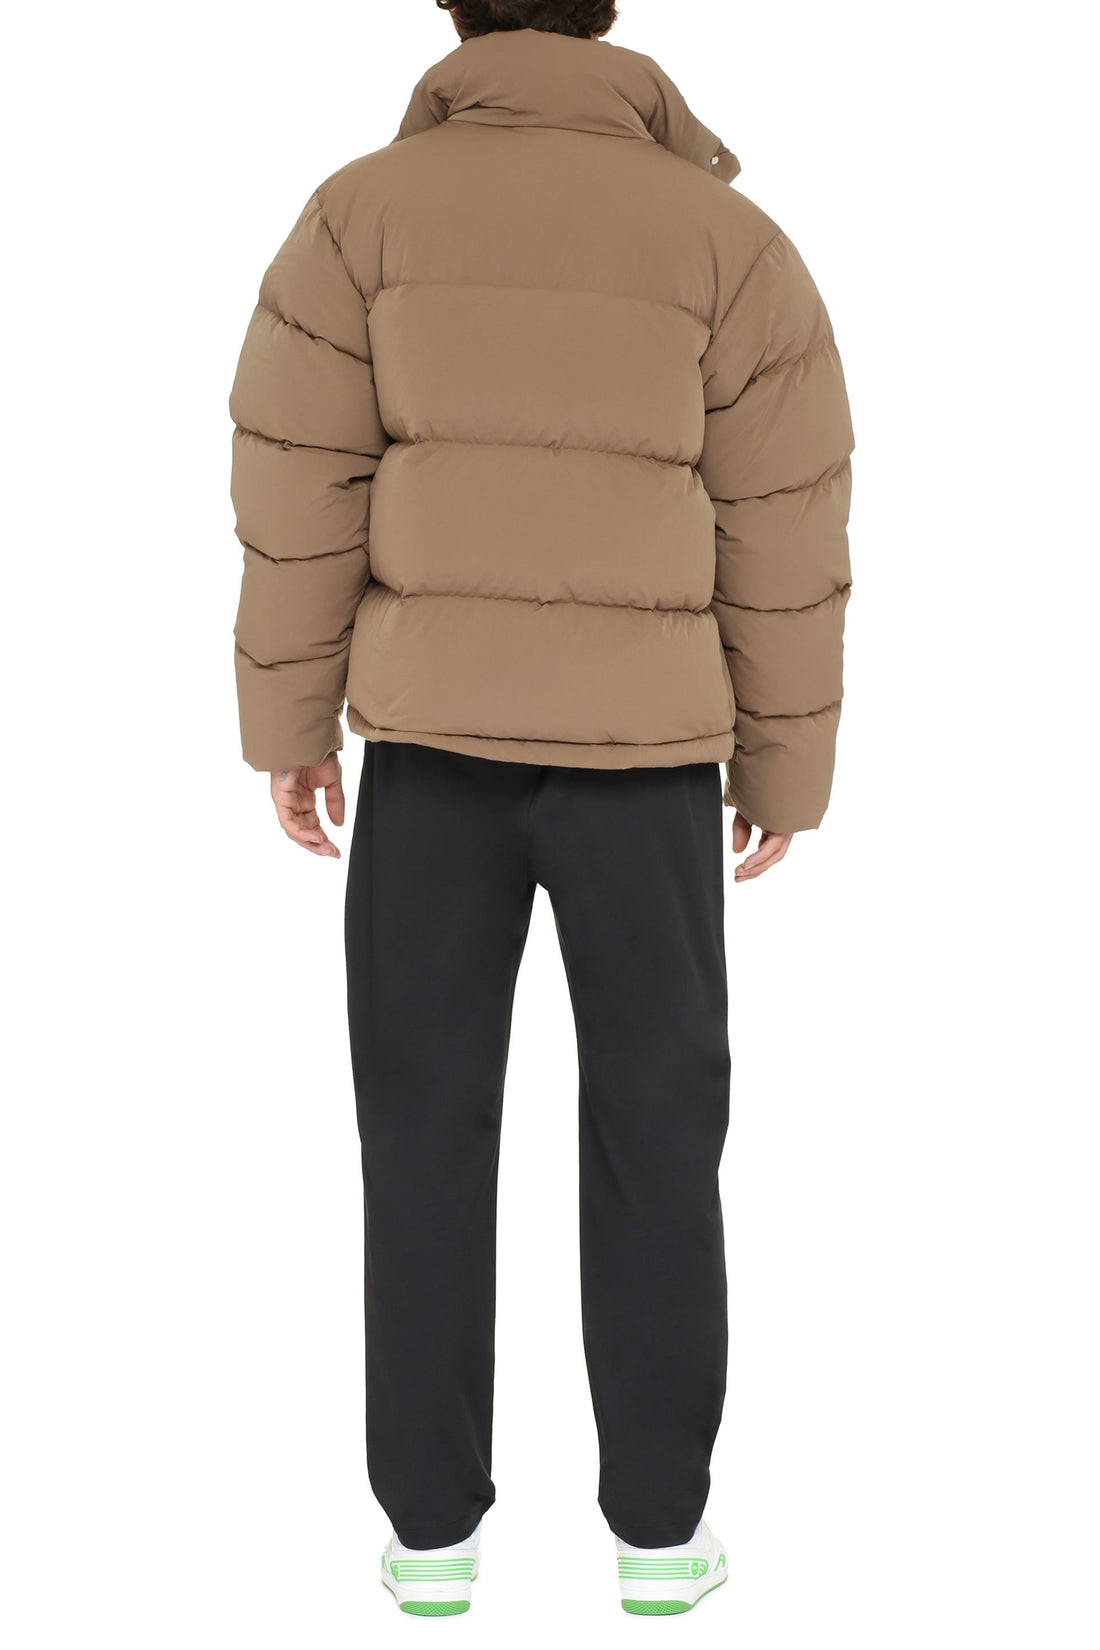 Axel Arigato-OUTLET-SALE-Halo full zip down jacket-ARCHIVIST